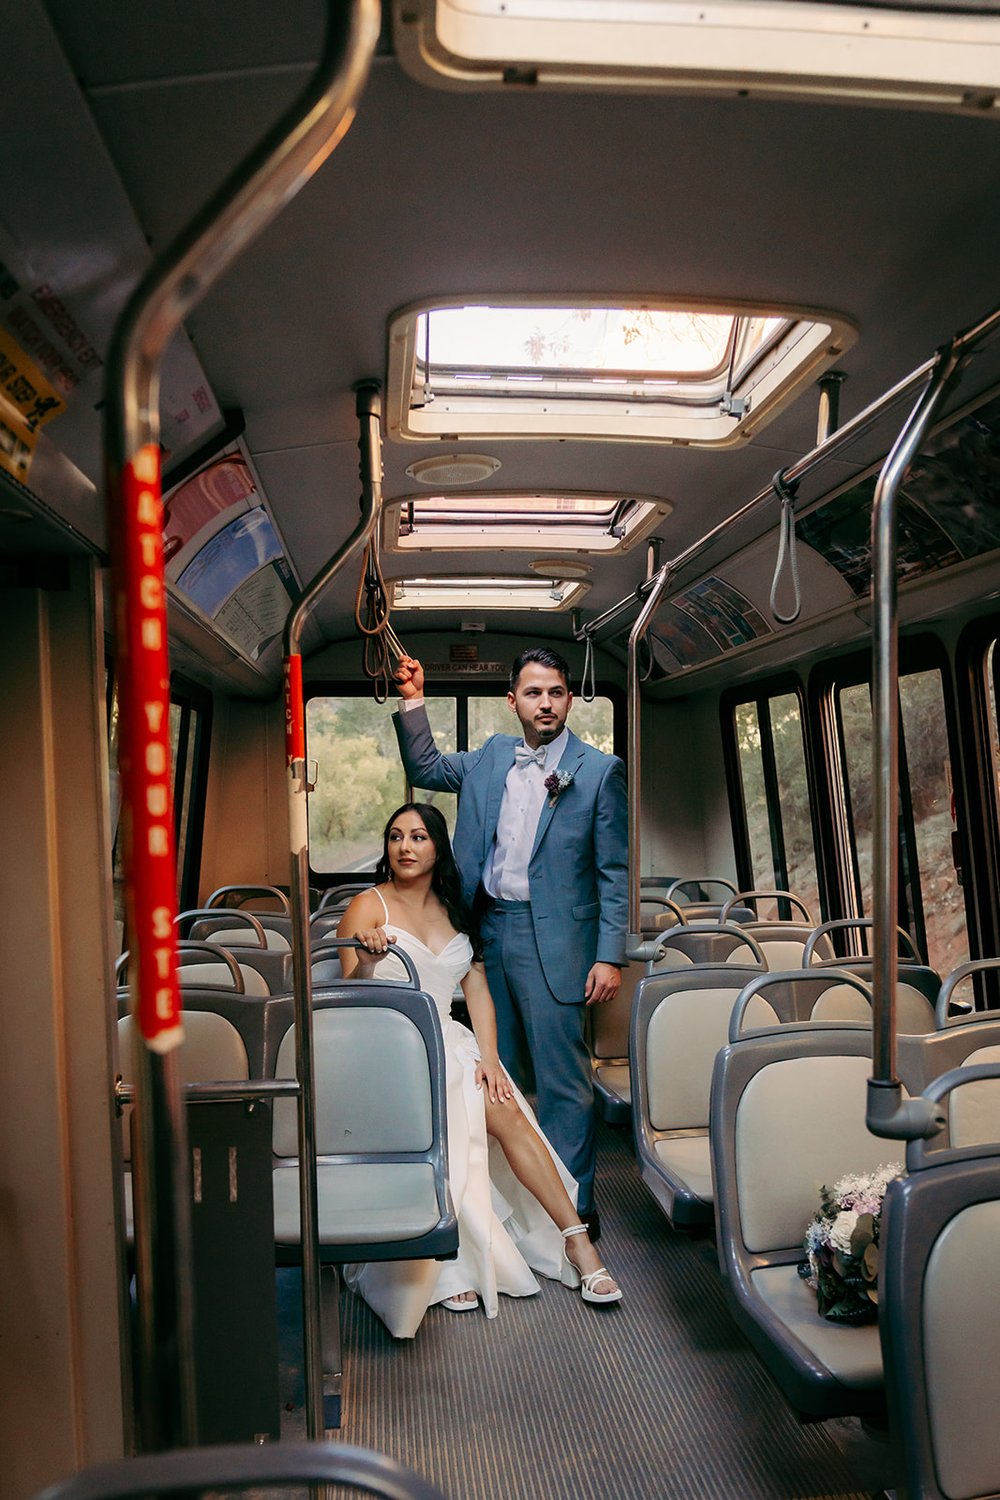  Bride and Groom in a shuttle bus  